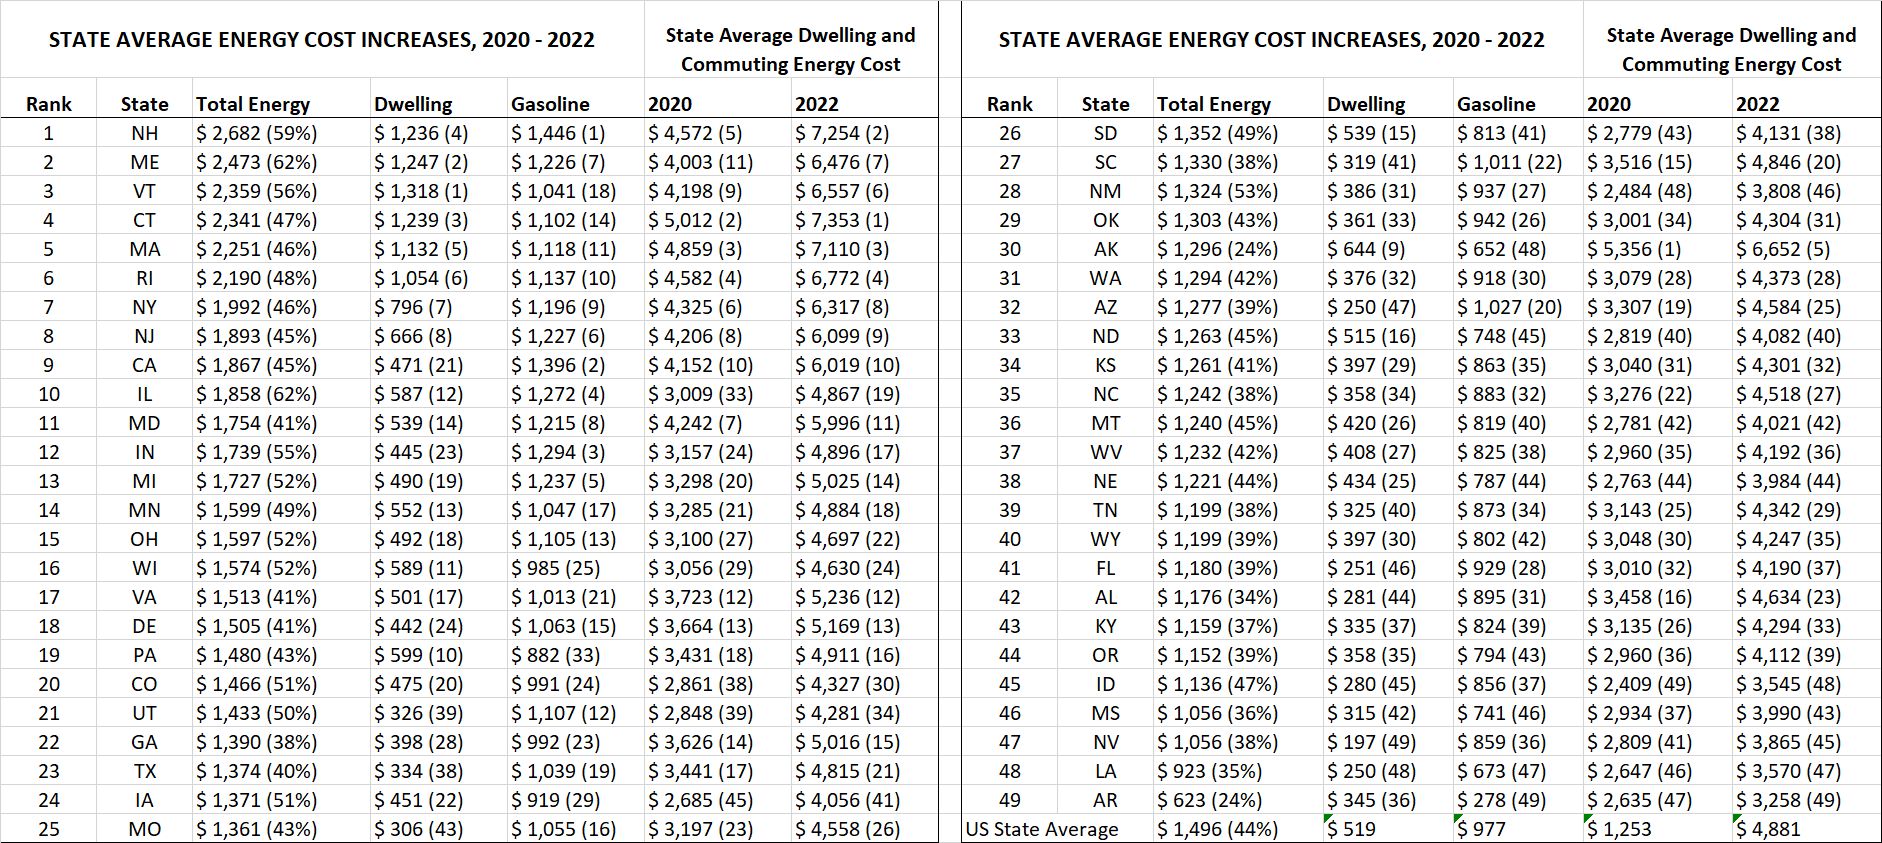 State-Level Energy Cost Inflation